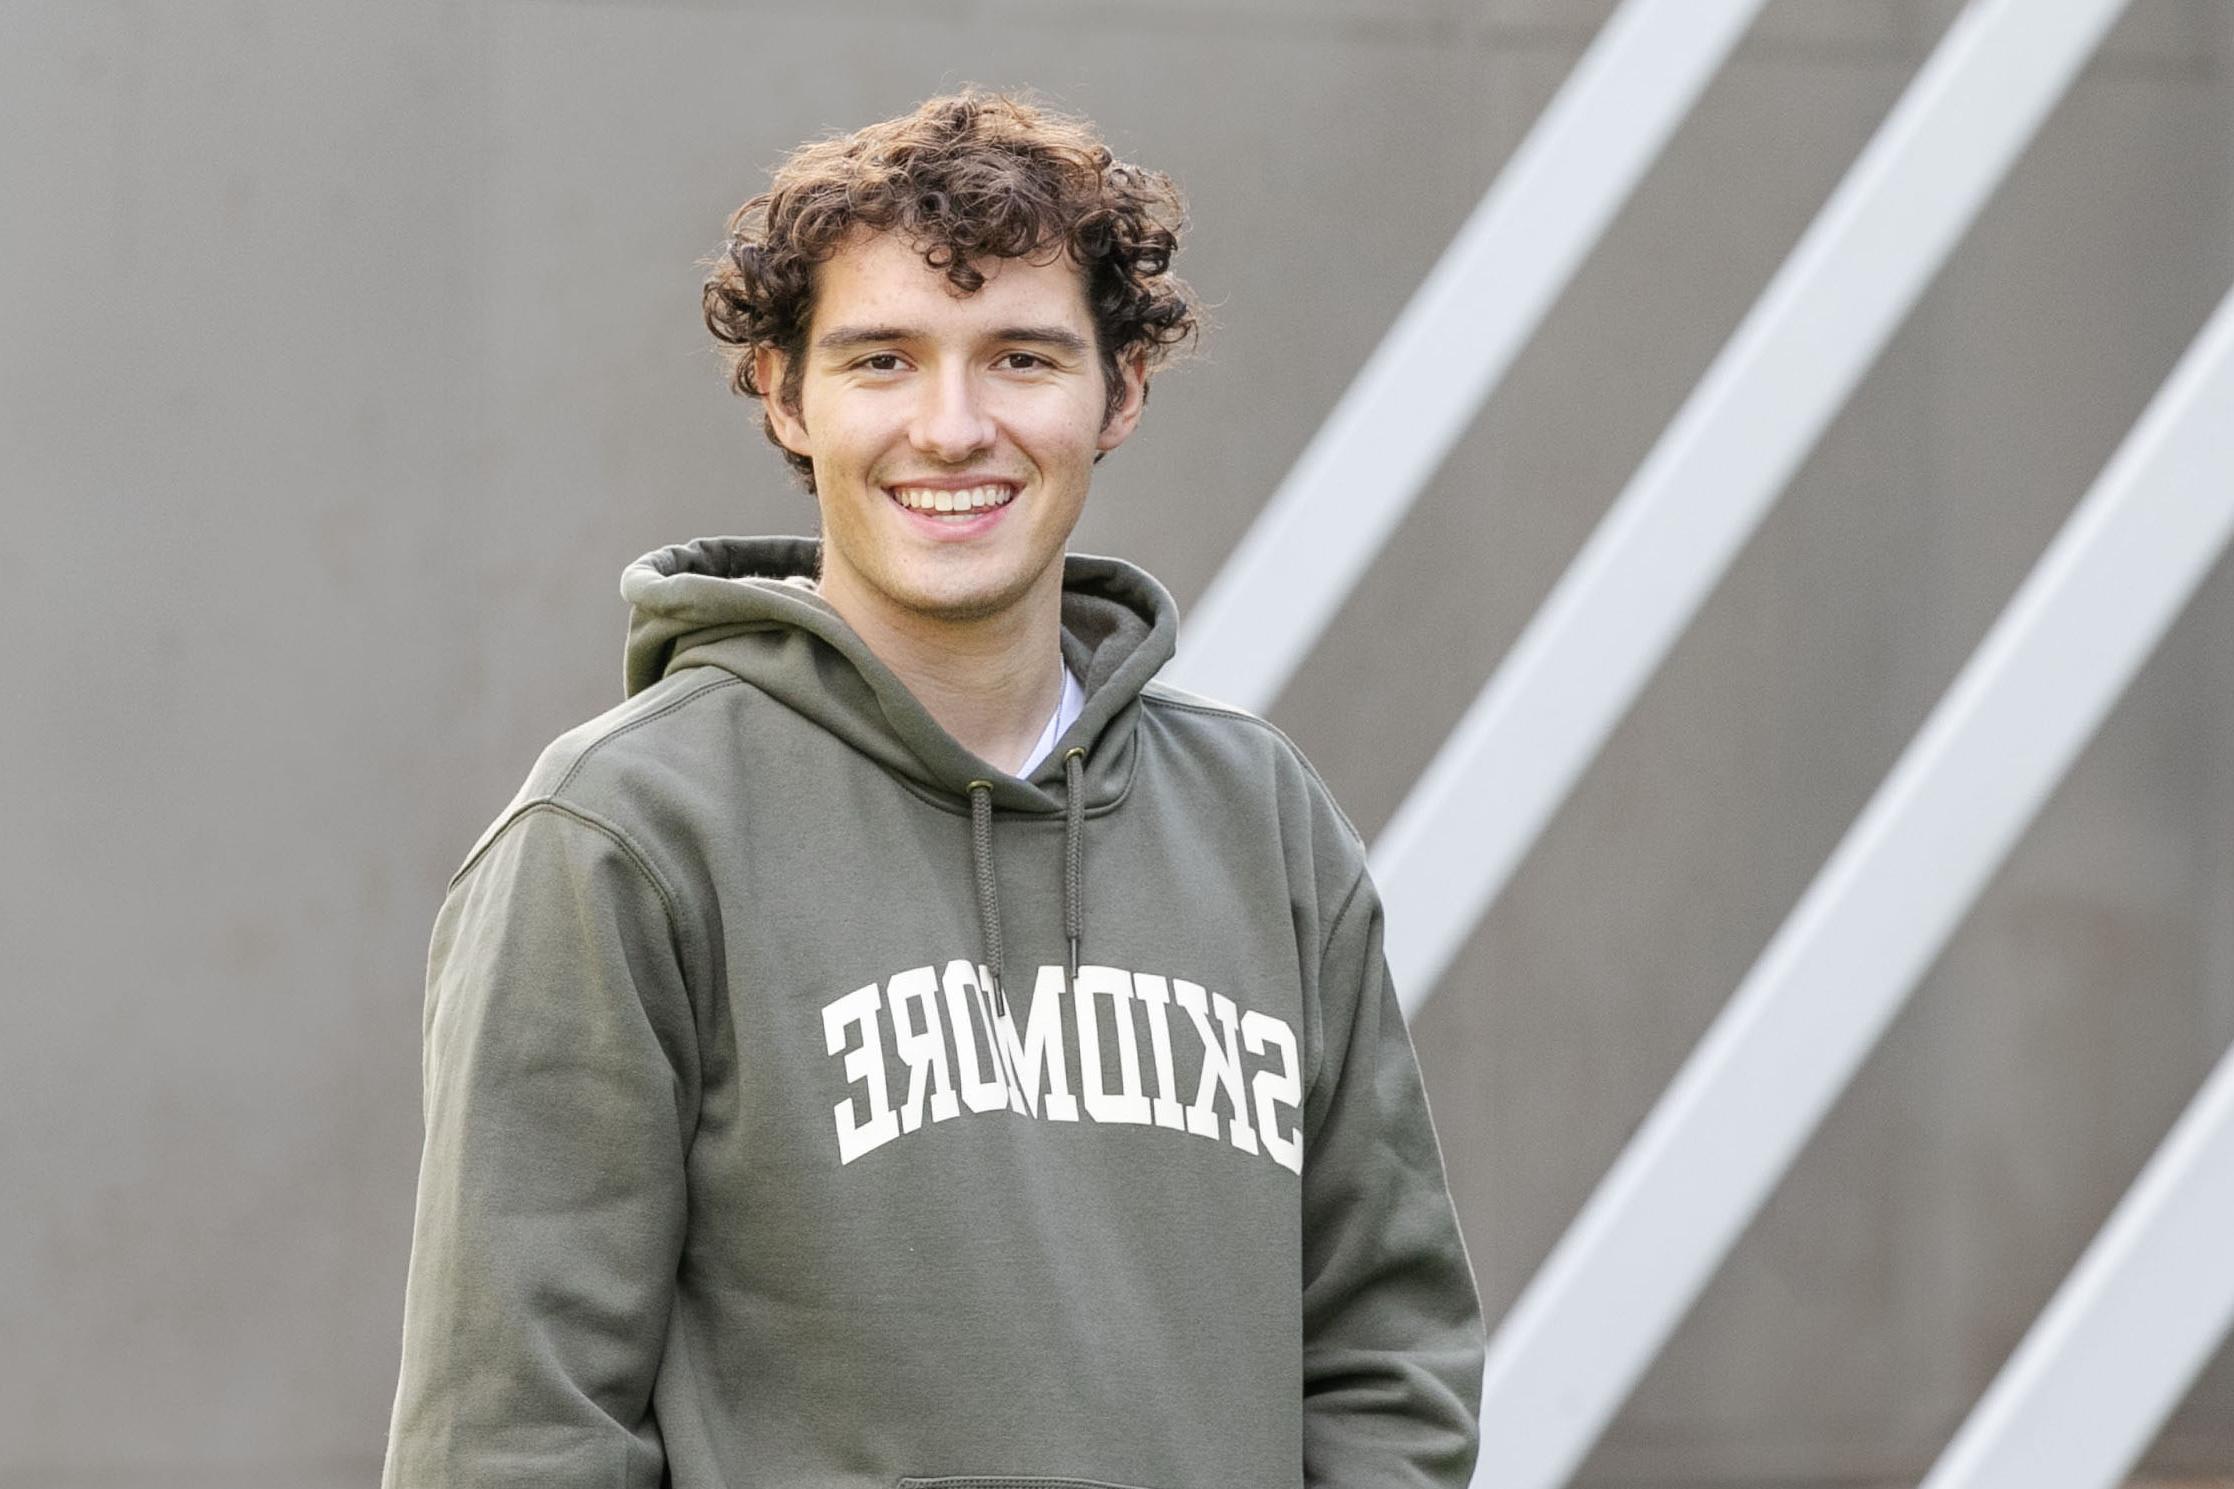 Braedon Quinlan ’24 smiles at the camera while wearing a Skidmore sweatshirt in front of the Tang Teaching Museum.